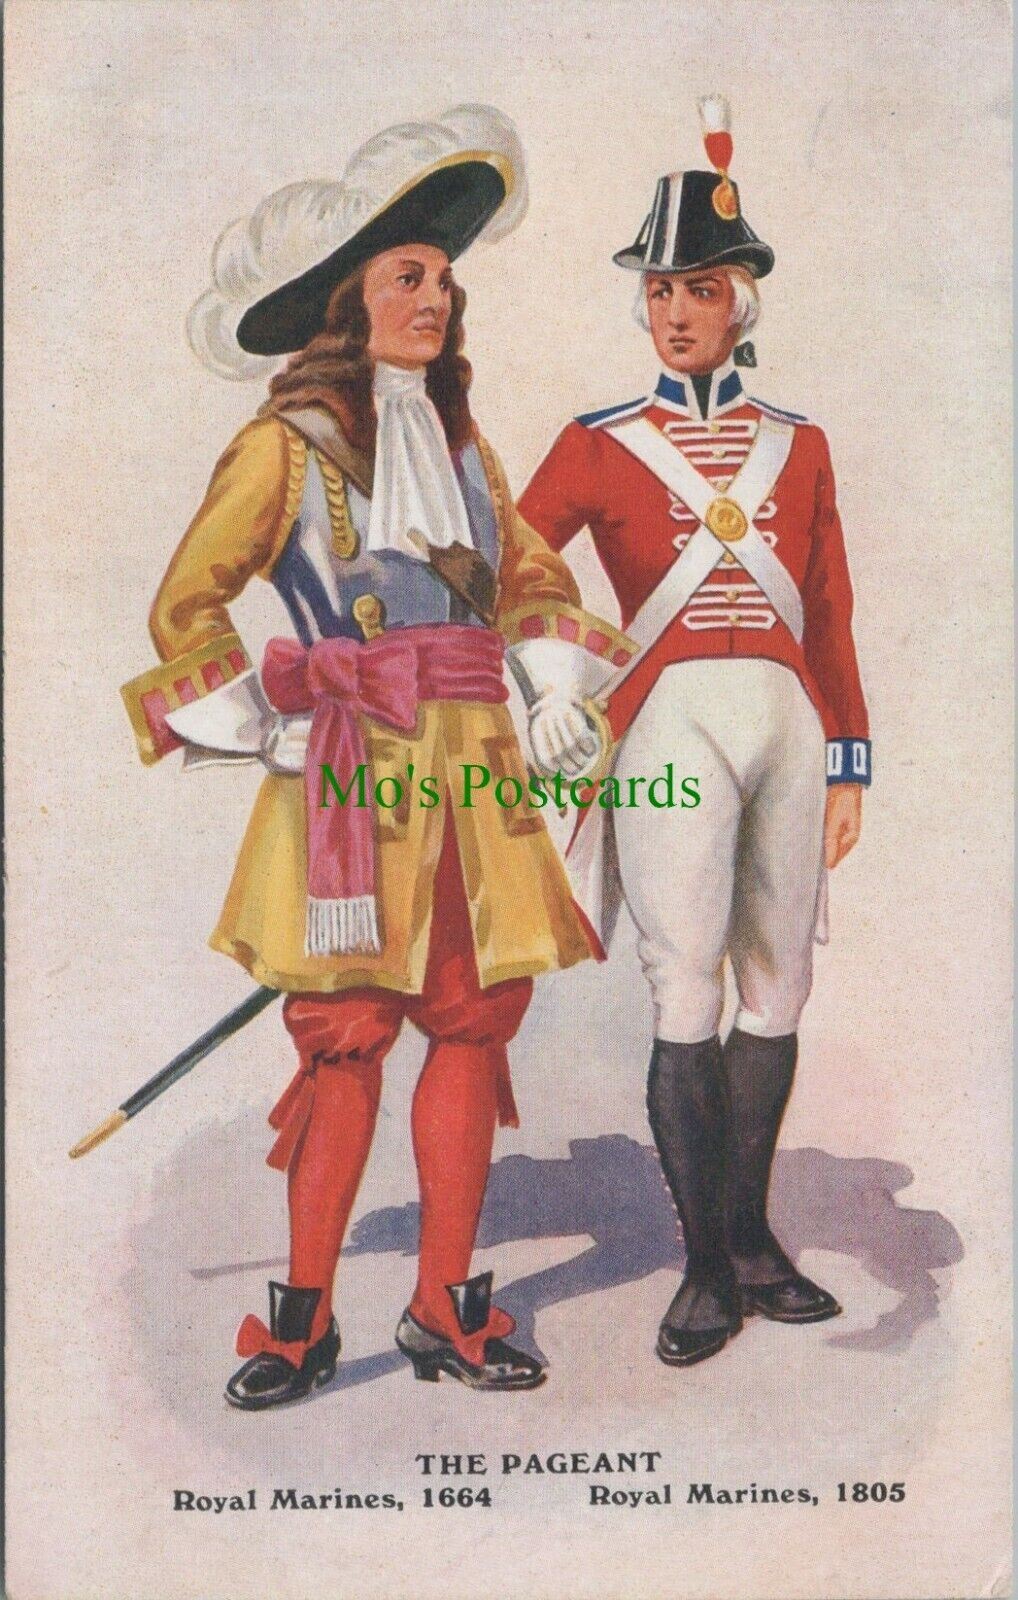 Military Postcard -The Pageant, Royal Marines 1805 and 1664 - RS27702